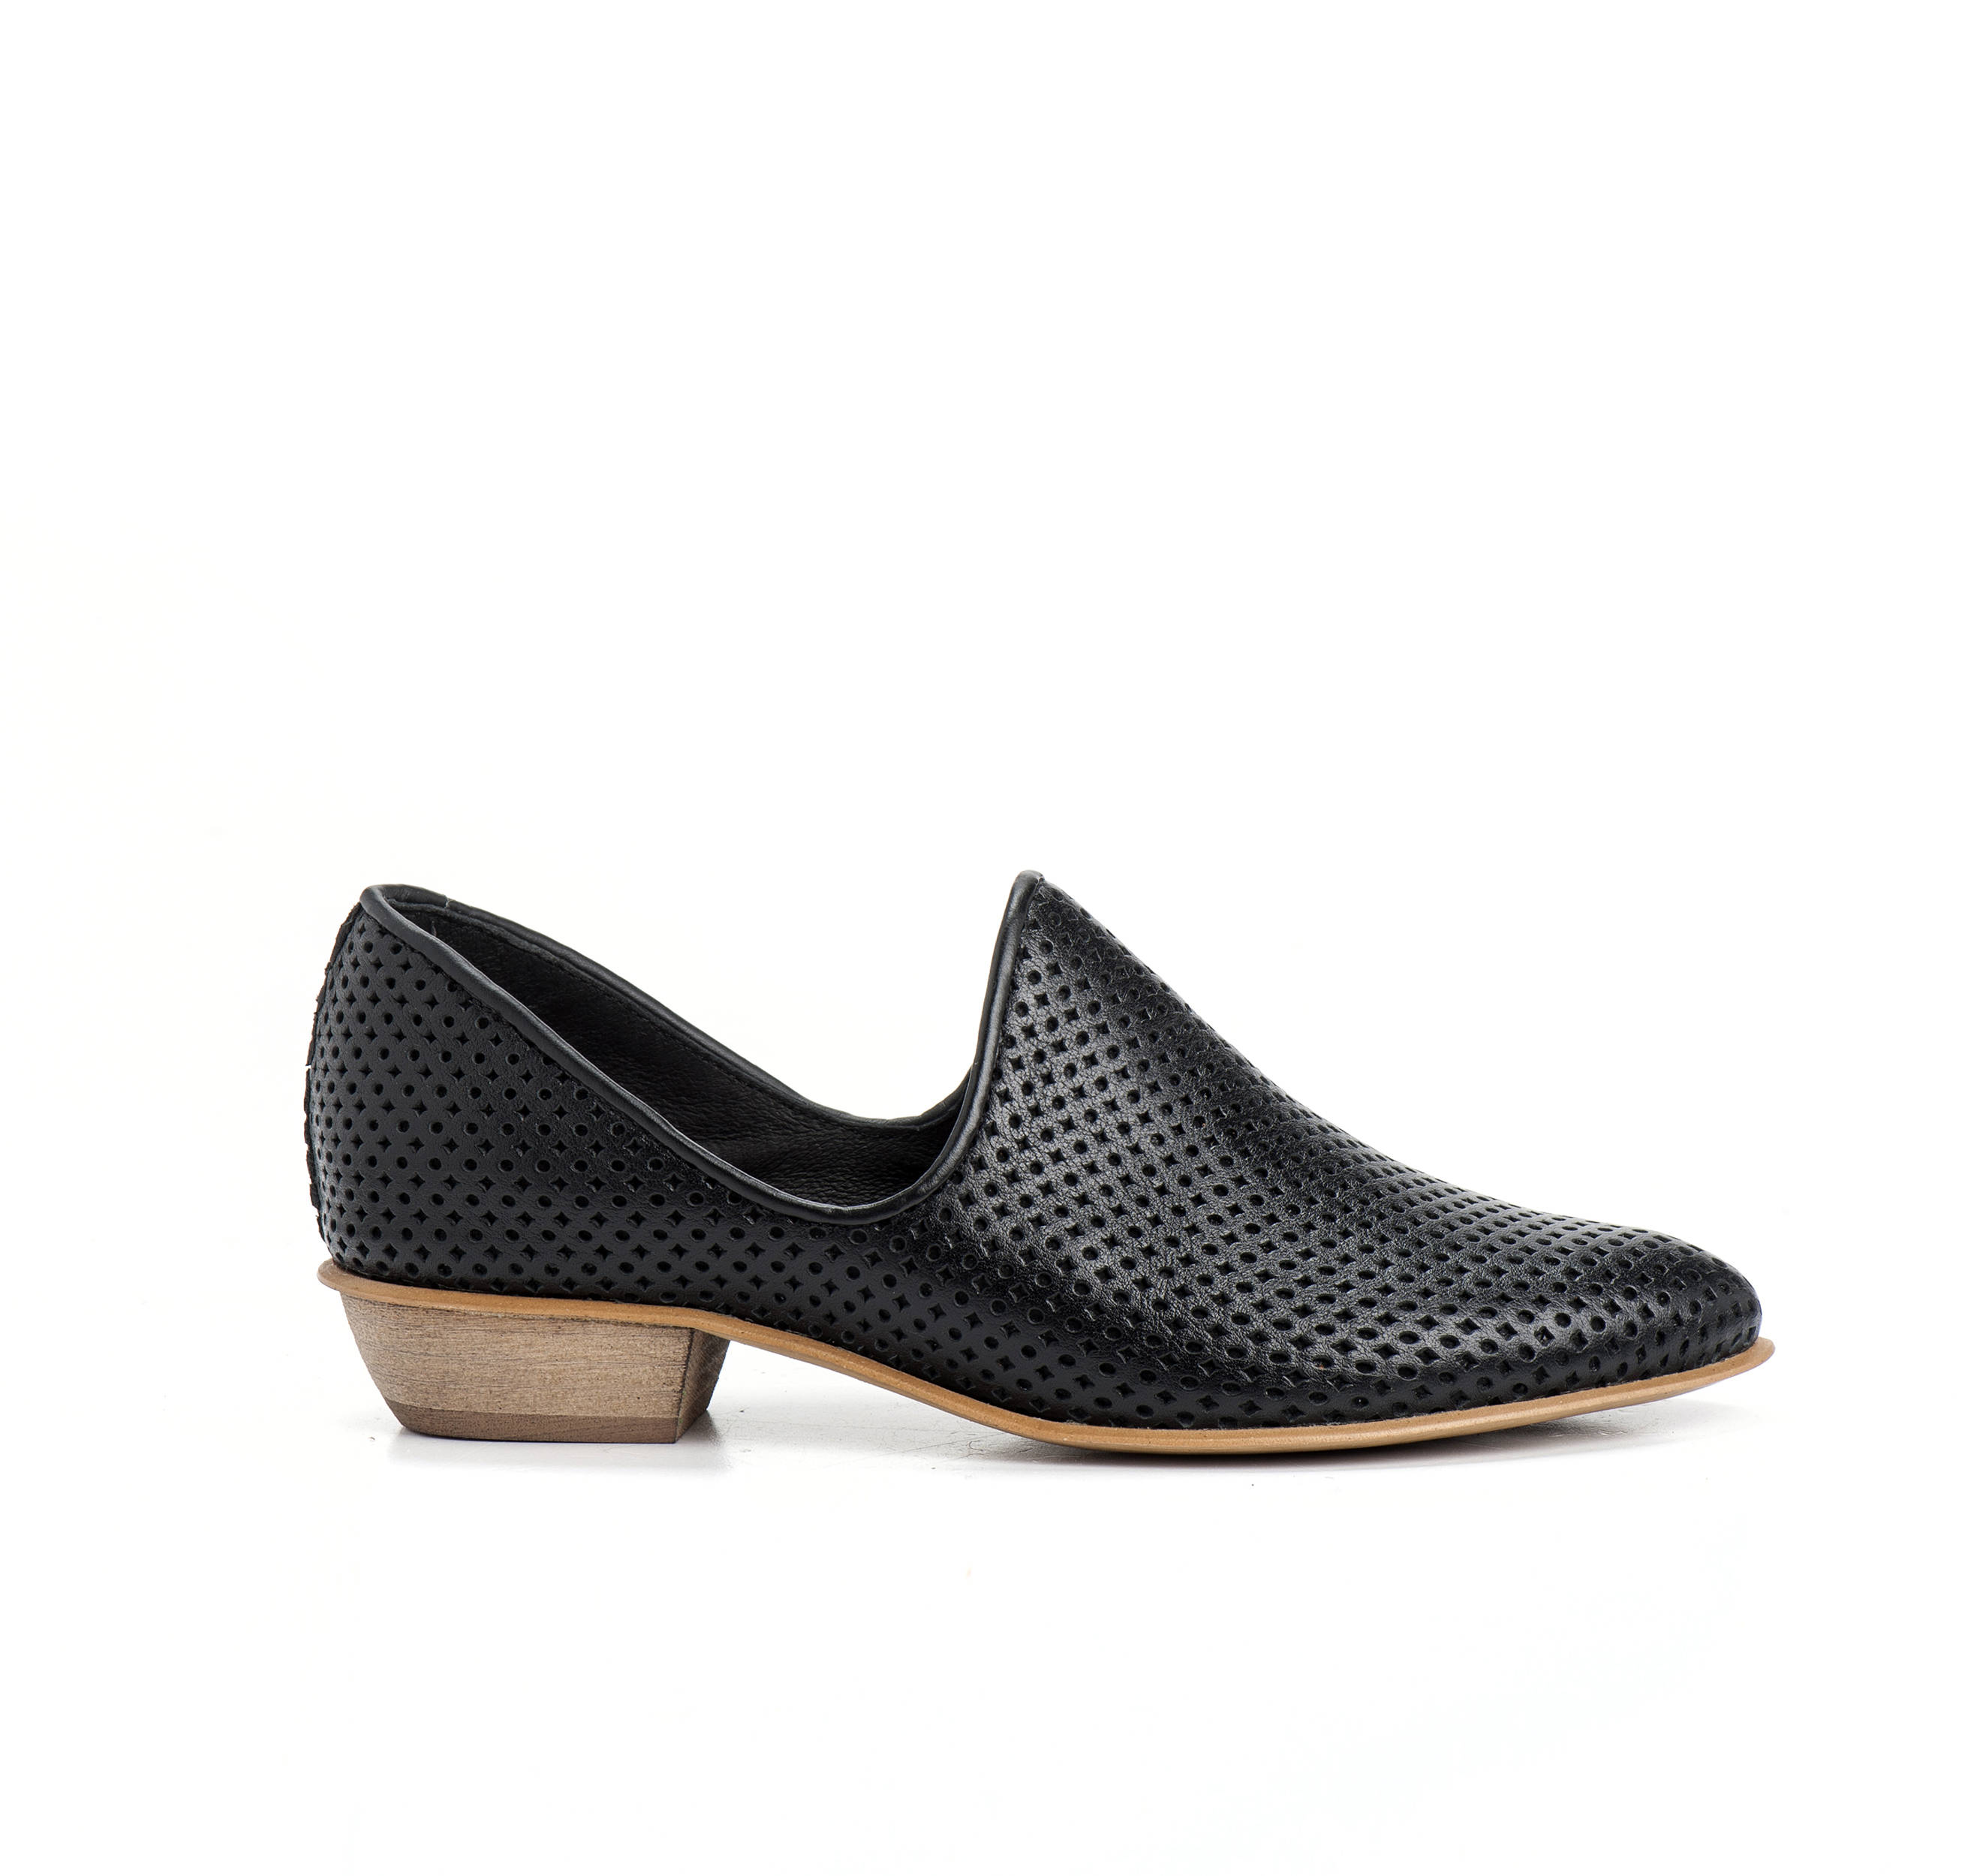 Flat Black Leather Shoes / Women Shoes / Every Day Shoes